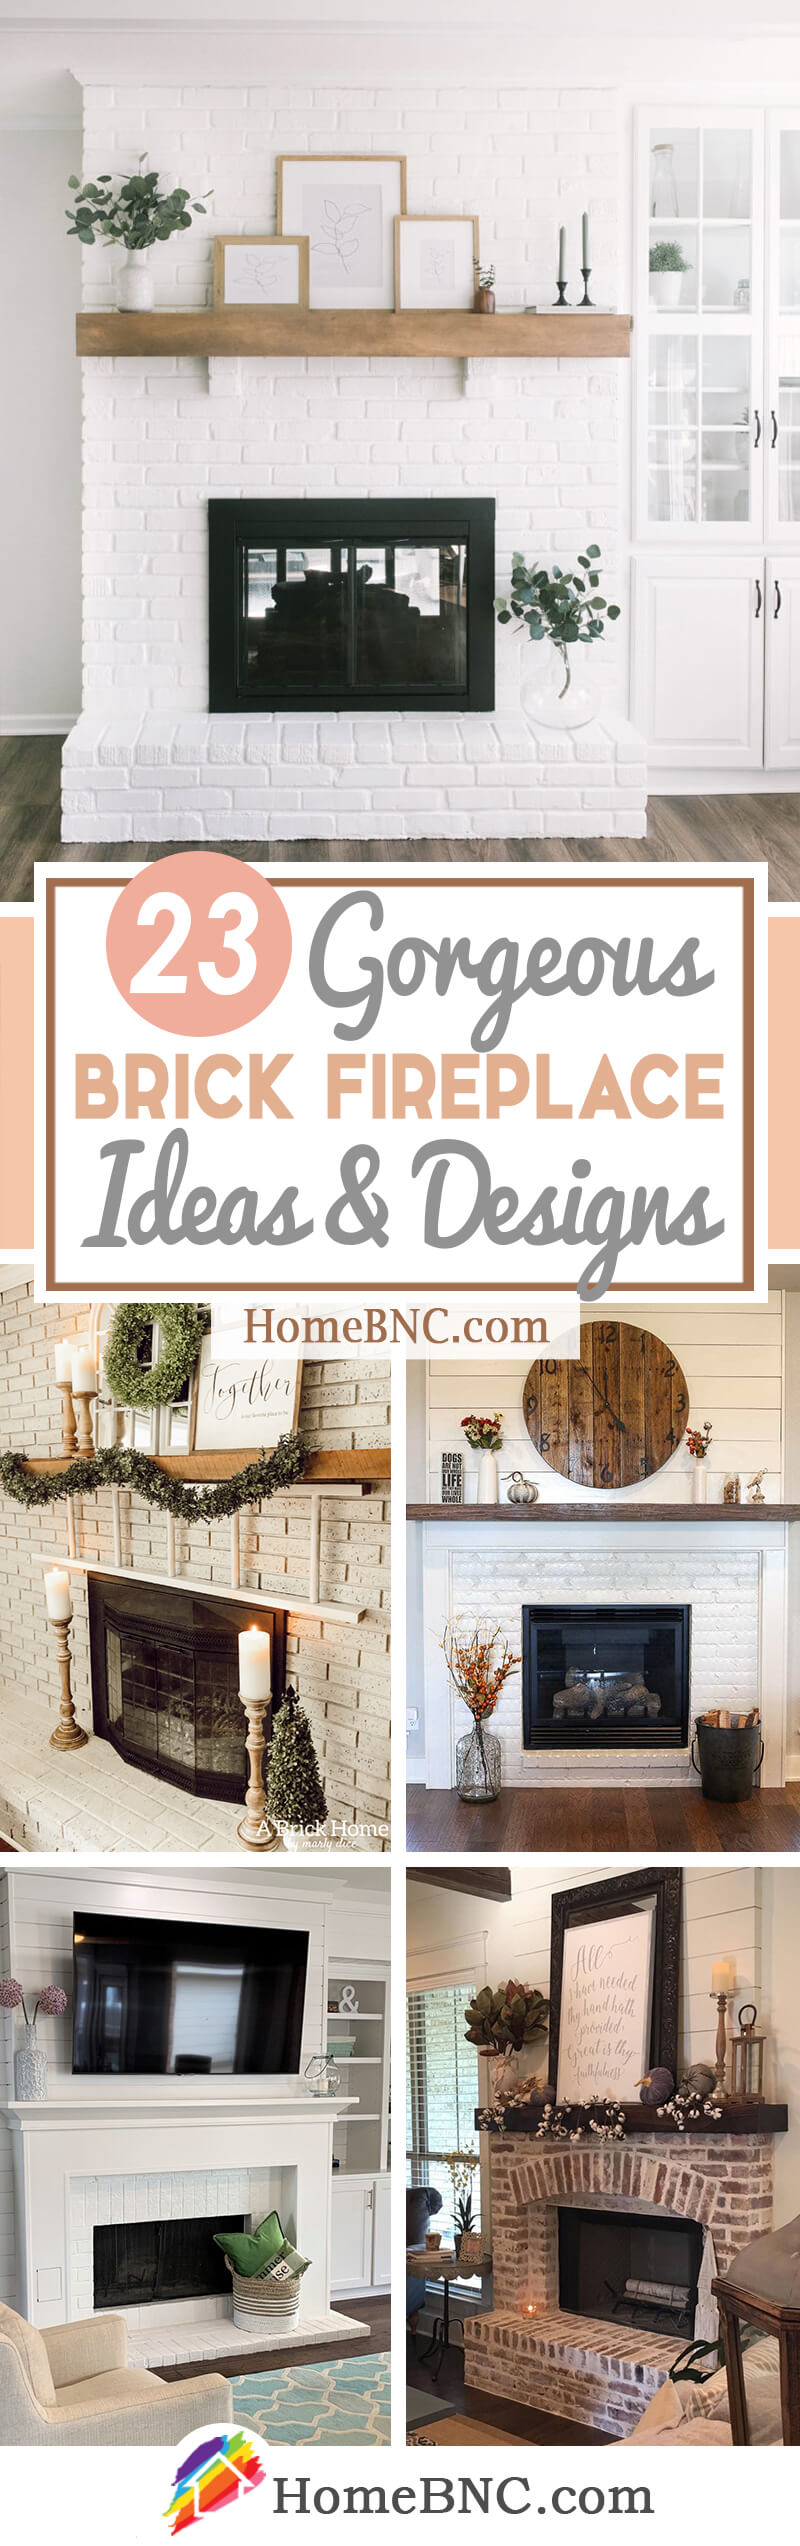 How to Update Brick Fireplace 